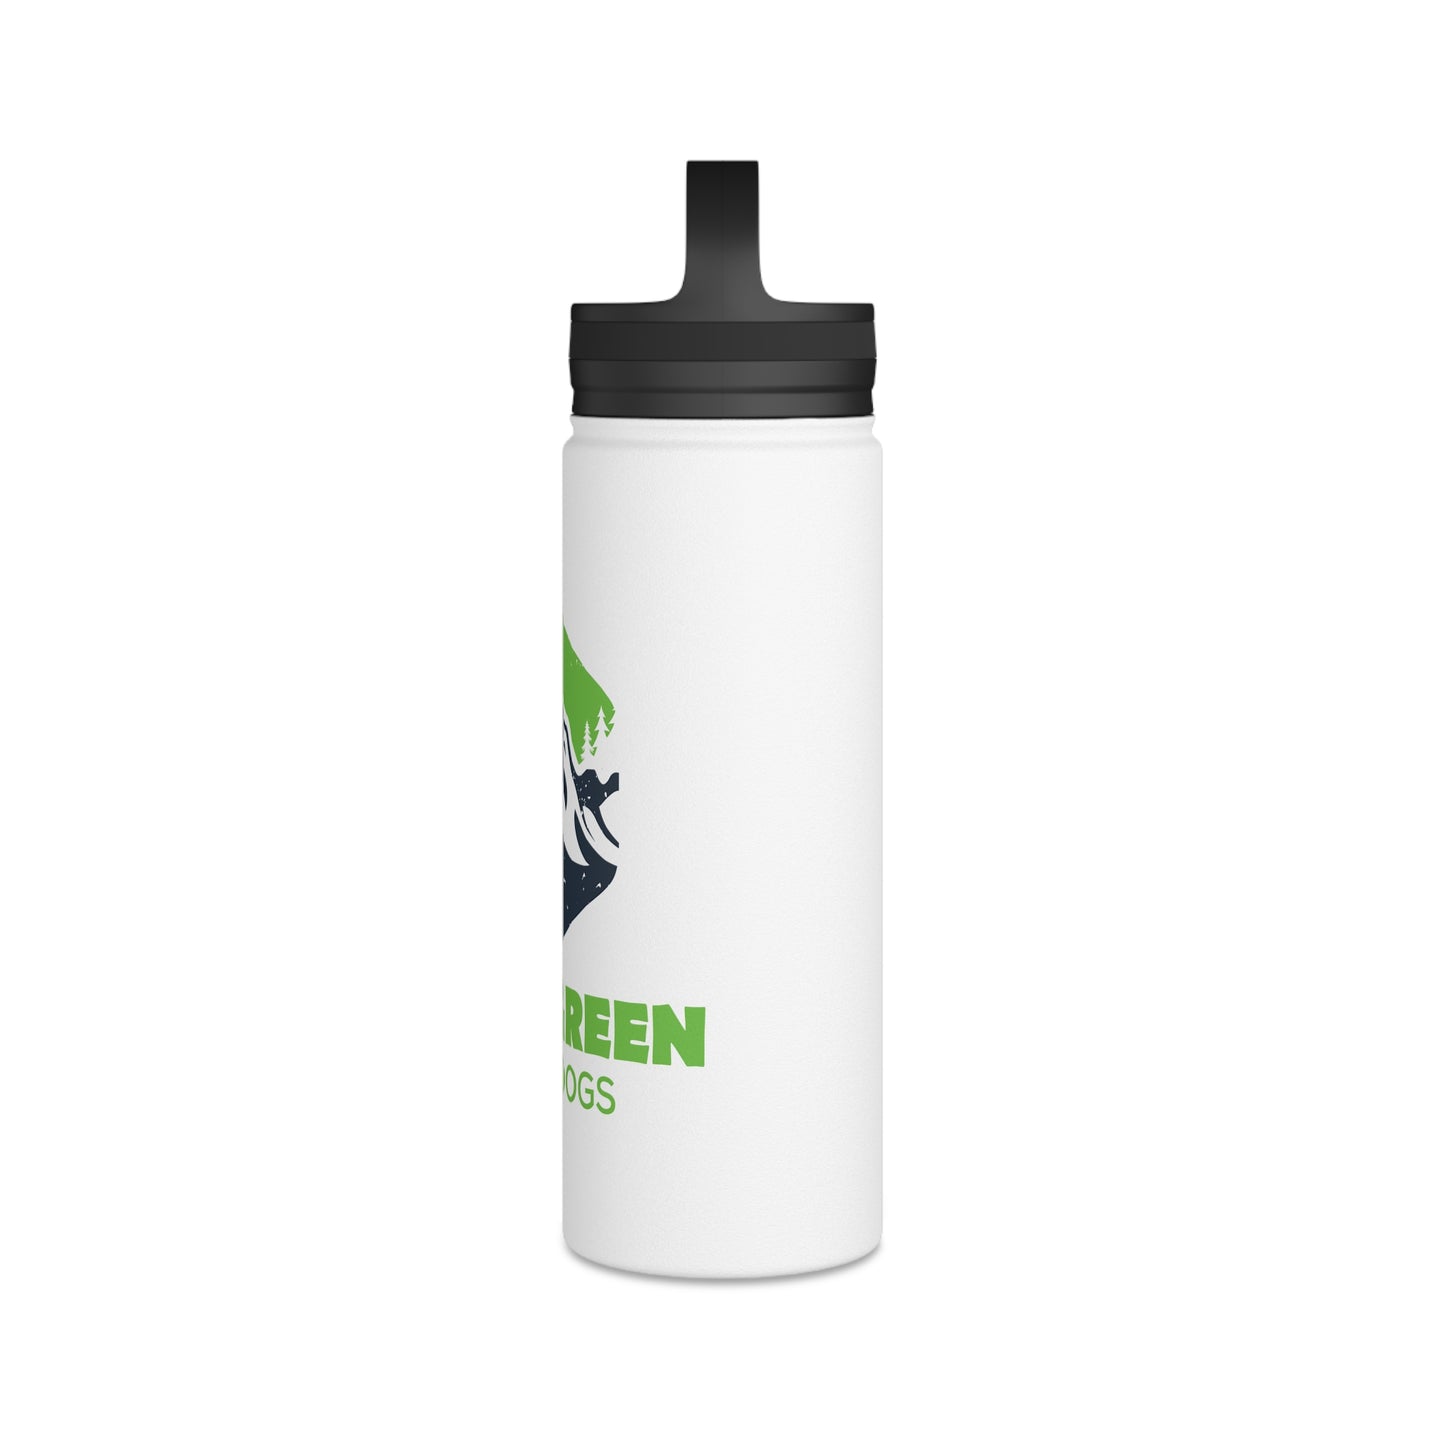 EVERGREEN DISC DOGS Stainless Steel Water Bottle, Handle Lid